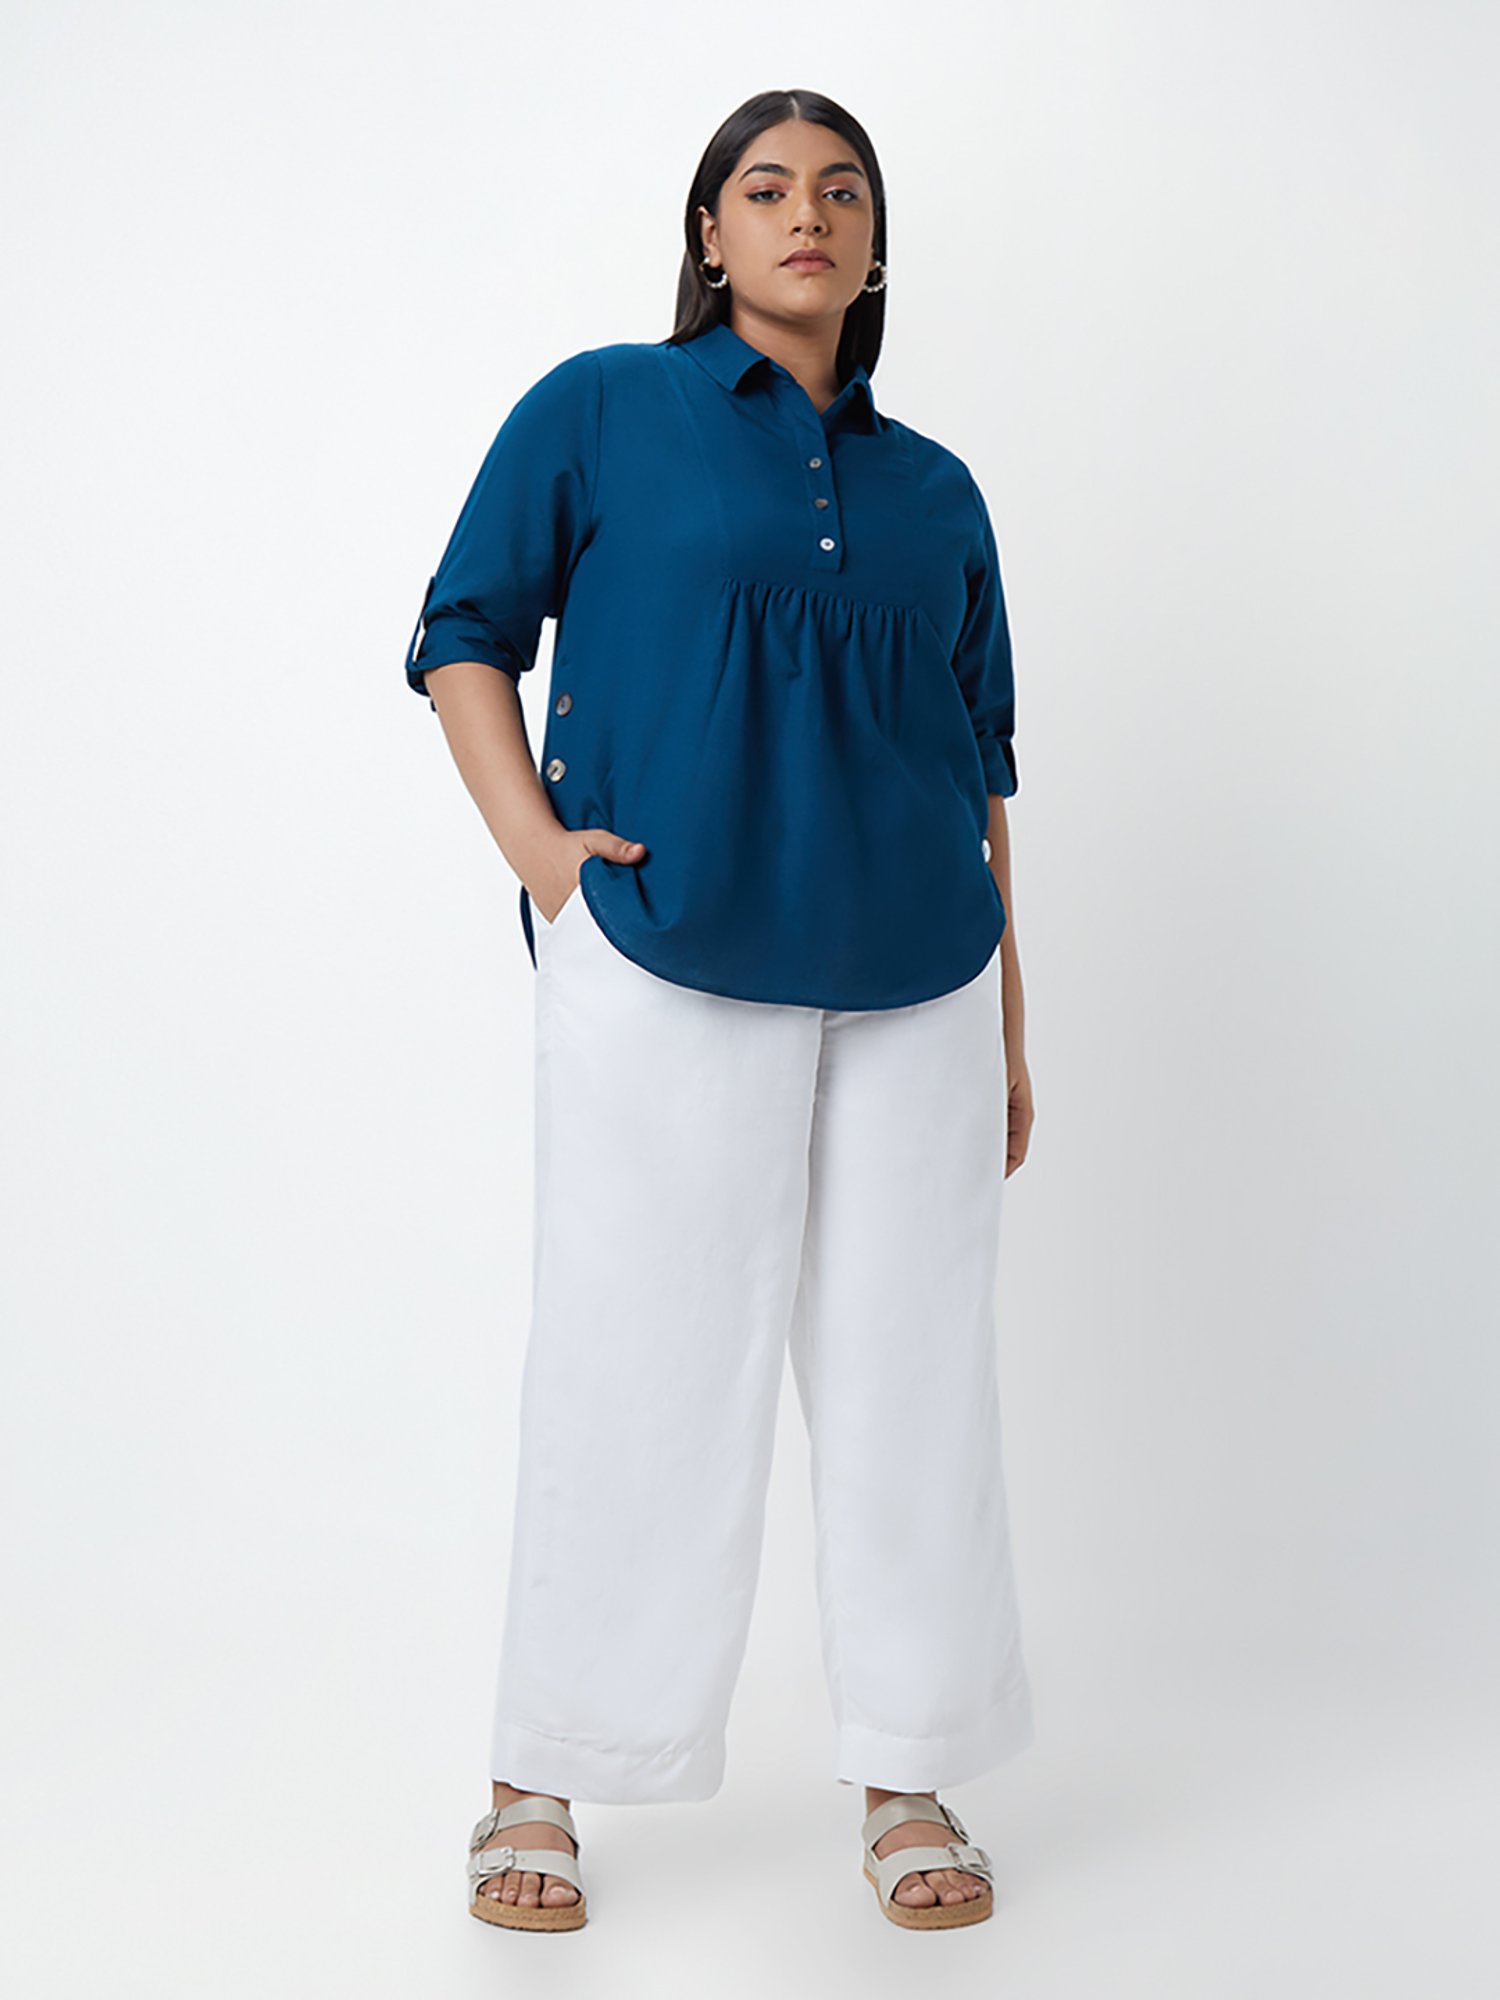 Lysse Vegan Pants: Accentuate Your Curves! - Gia On The Move